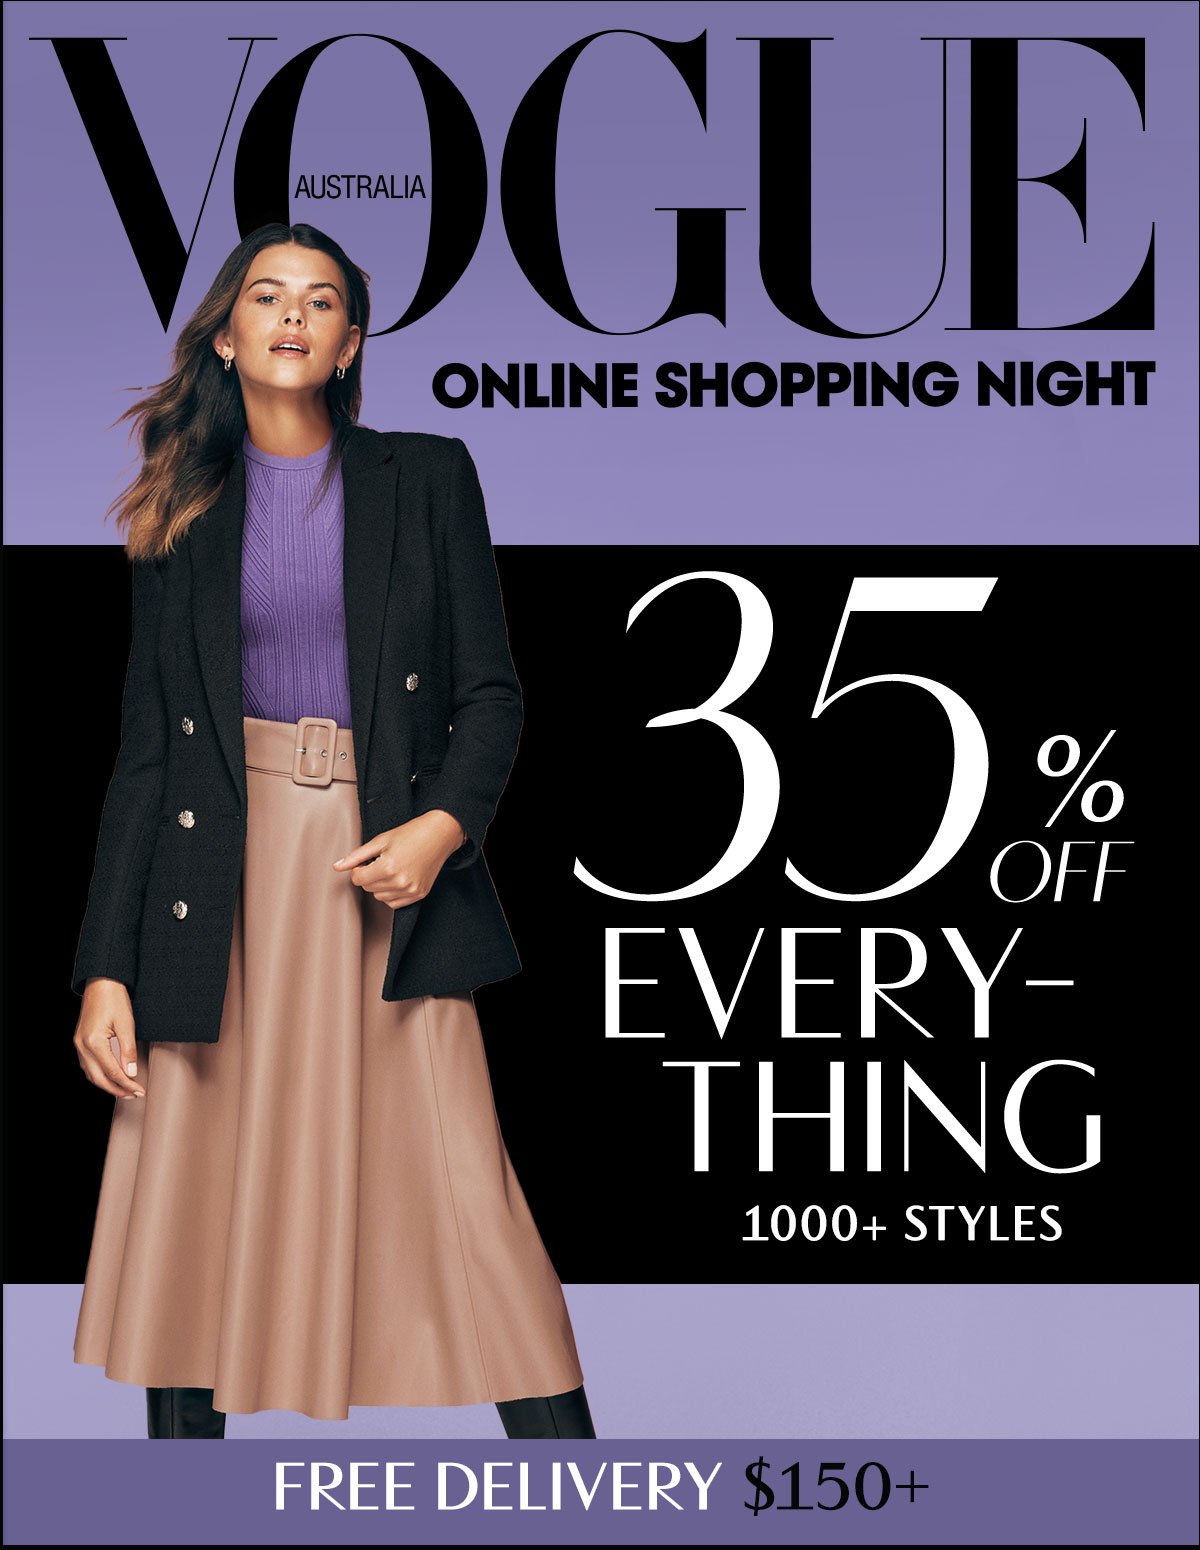 Vogue Australia. Online Shopping Night. 35% Off Everything. 1000+ Styles. Free Delivery $150+